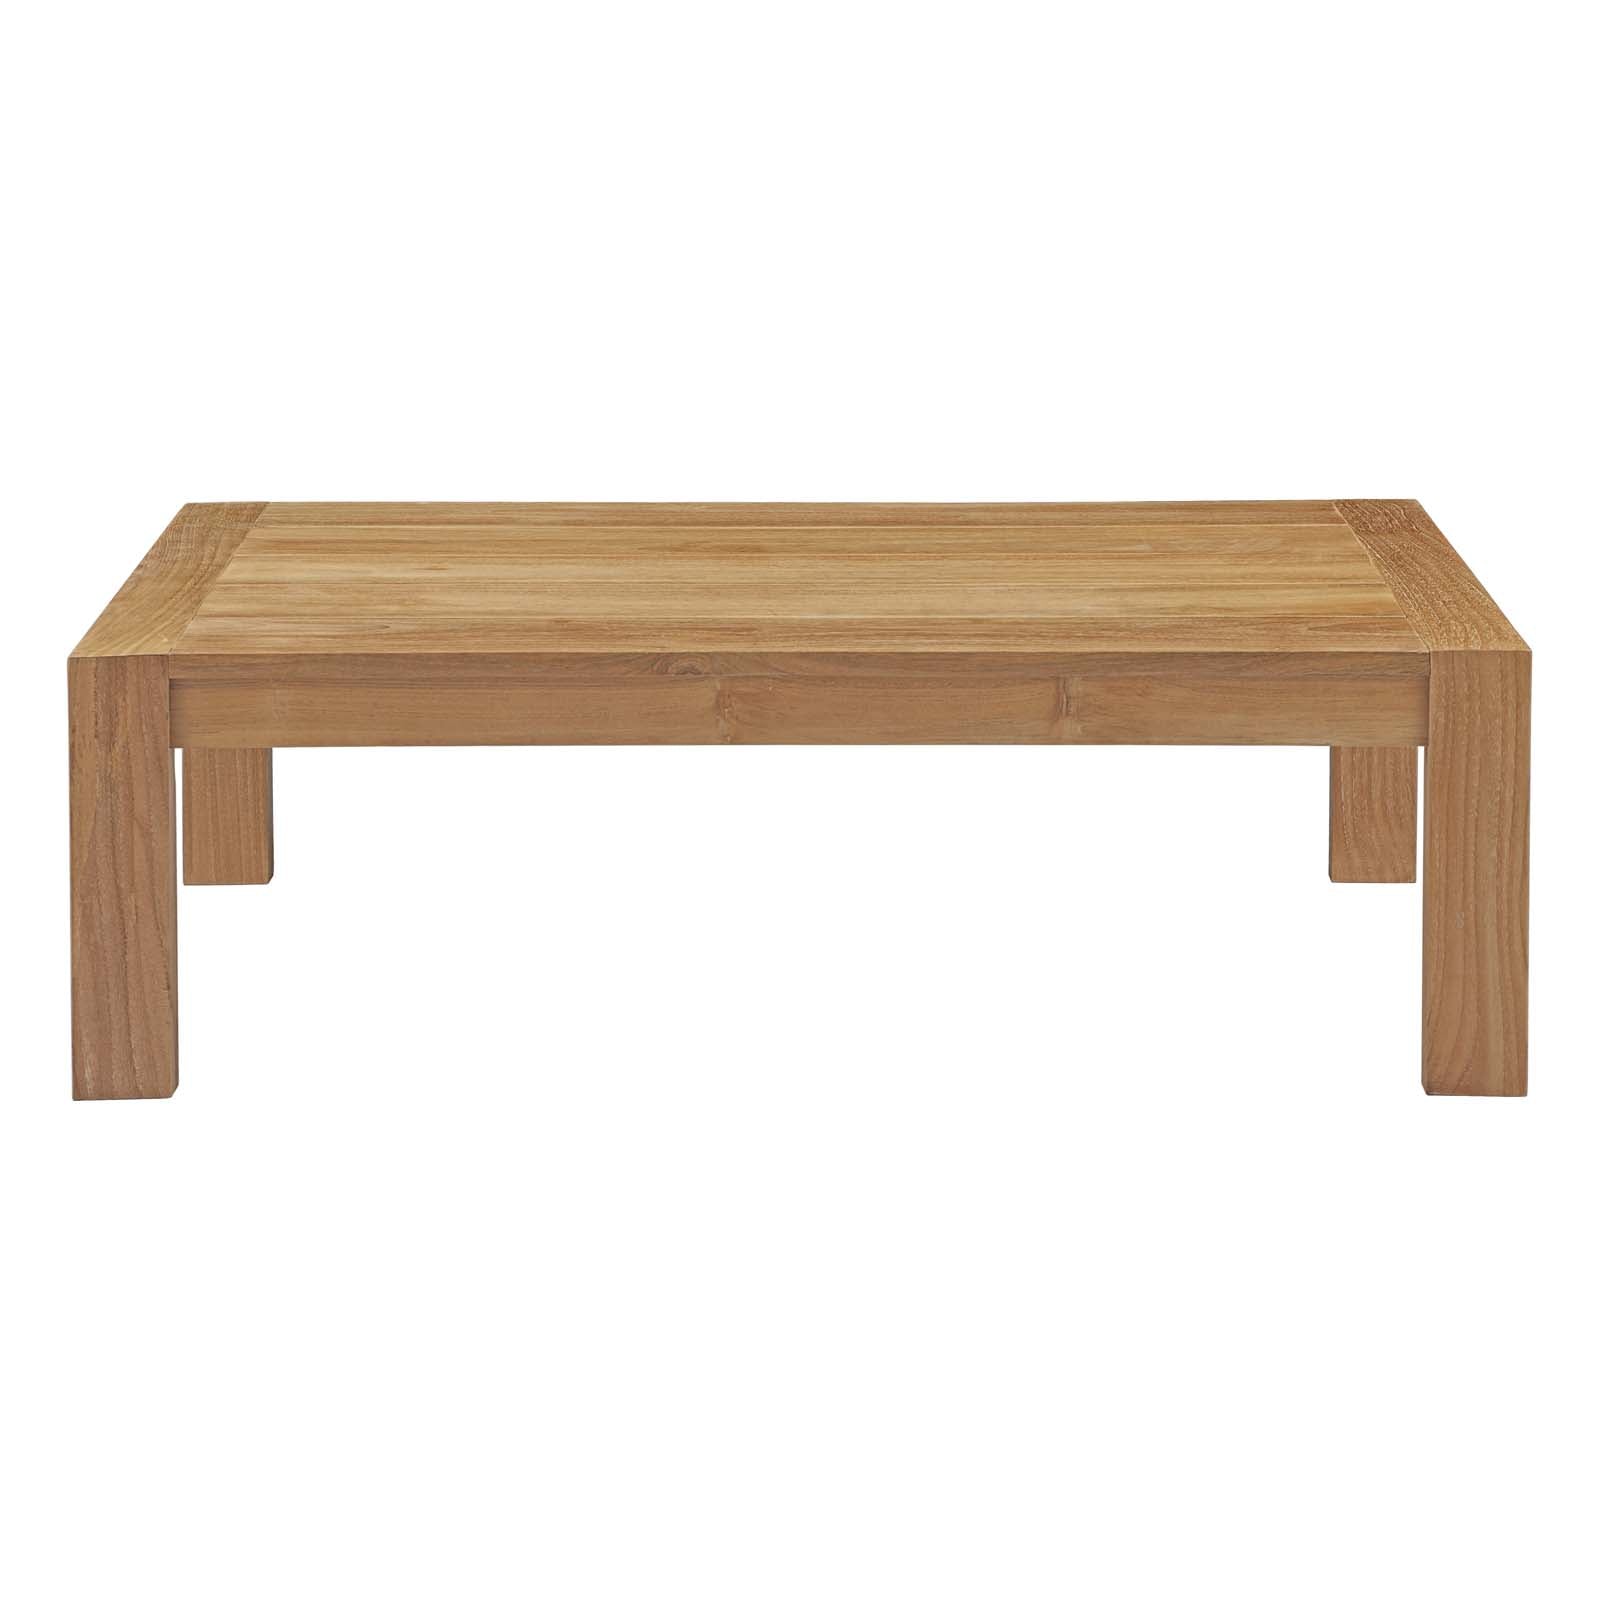 Upland Outdoor Patio Wood Coffee Table - East Shore Modern Home Furnishings